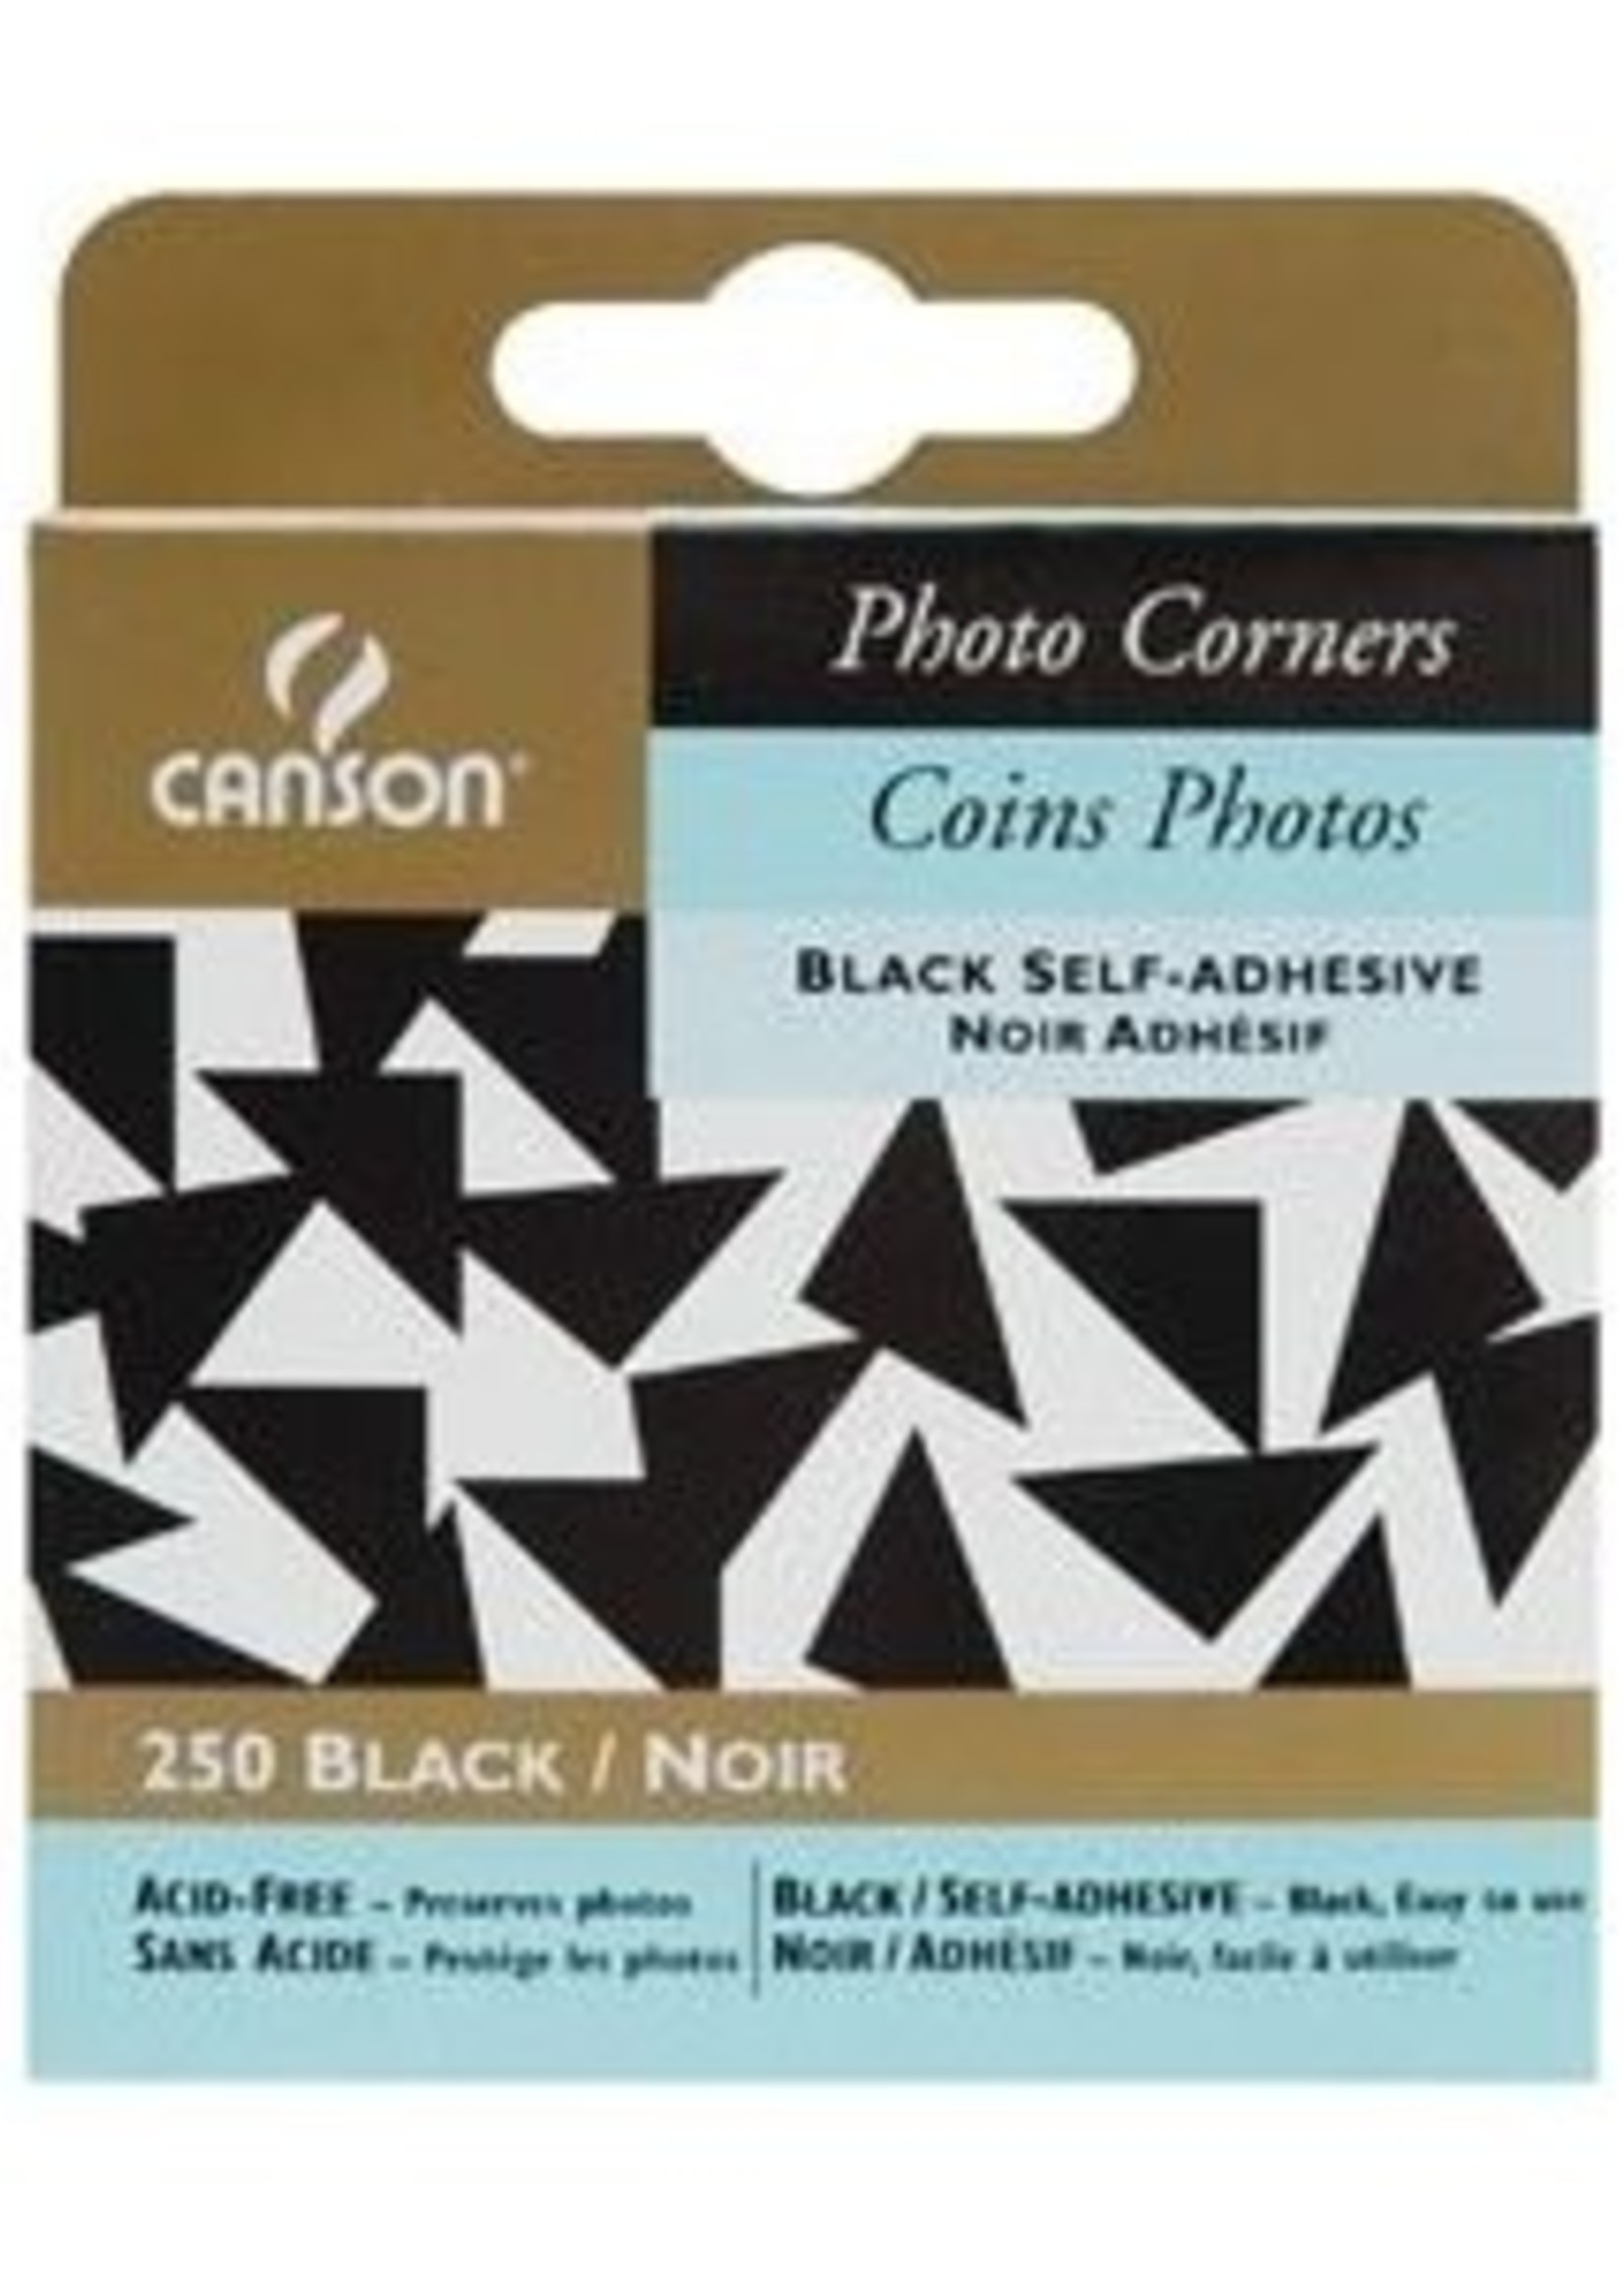 CANSON CANSON PHOTO CORNERS SELF-ADHESIVE BLACK 250/PK    CAN-100510370